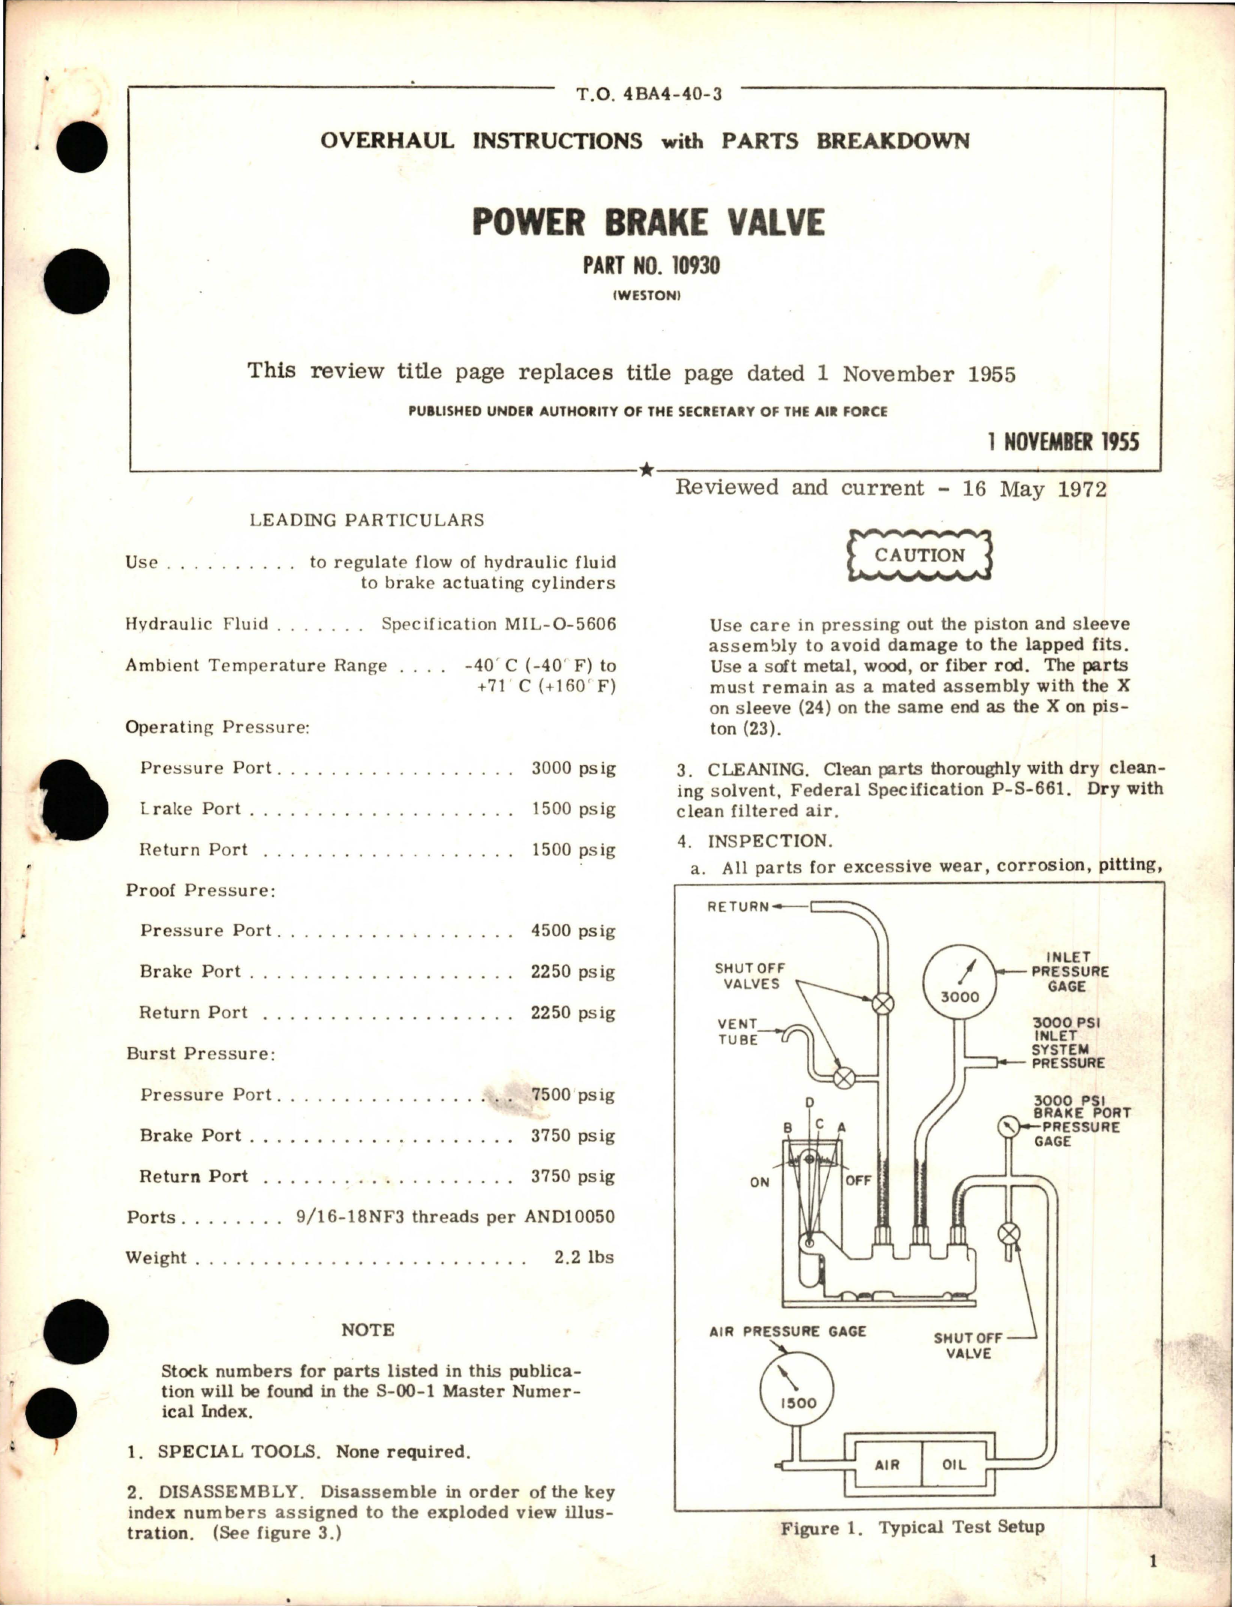 Sample page 1 from AirCorps Library document: Overhaul Instructions with Parts Breakdown for Power Brake Valve - Part 10930